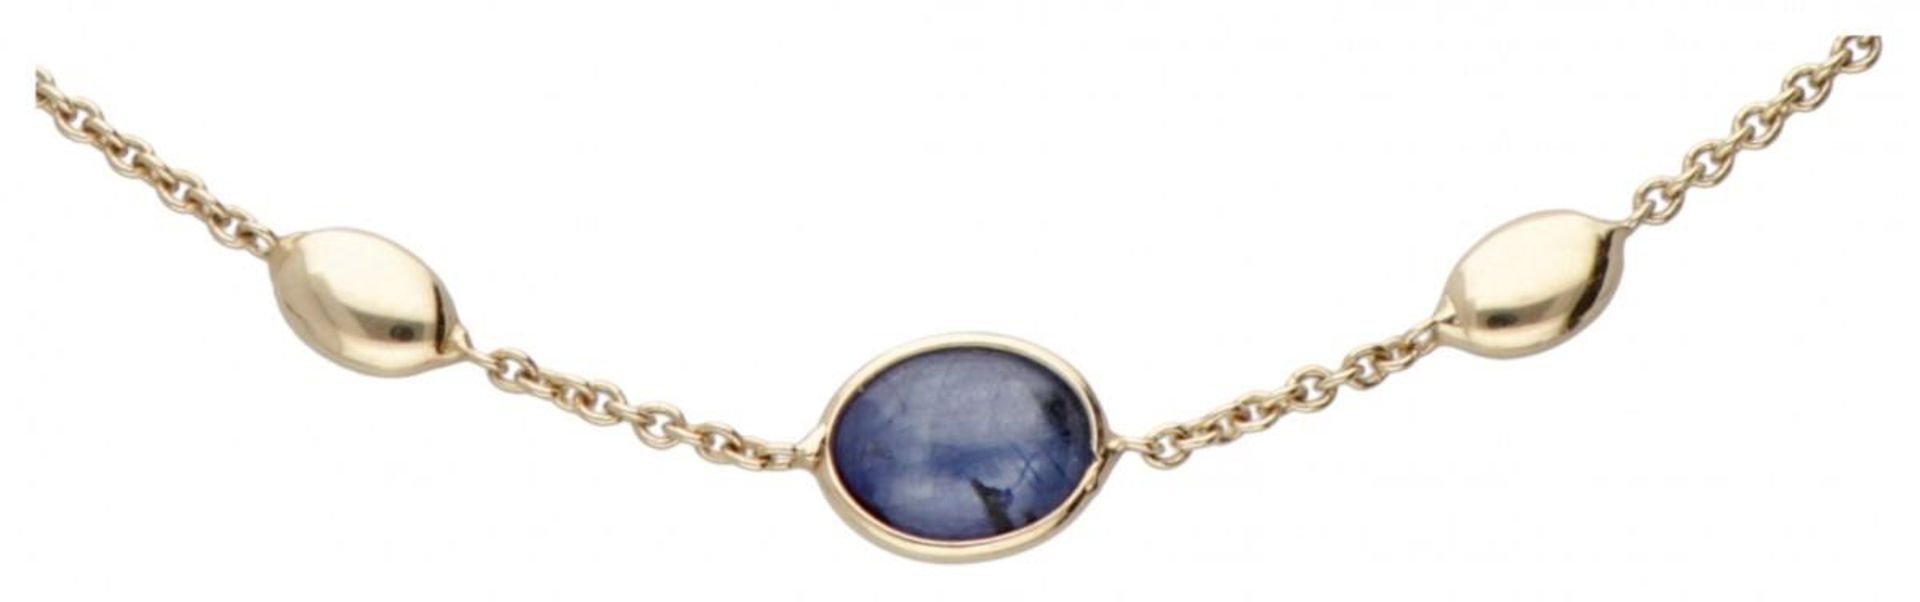 14K. Yellow gold Monzario link necklace set with approx. 9.60 ct. natural sapphire. - Image 2 of 4